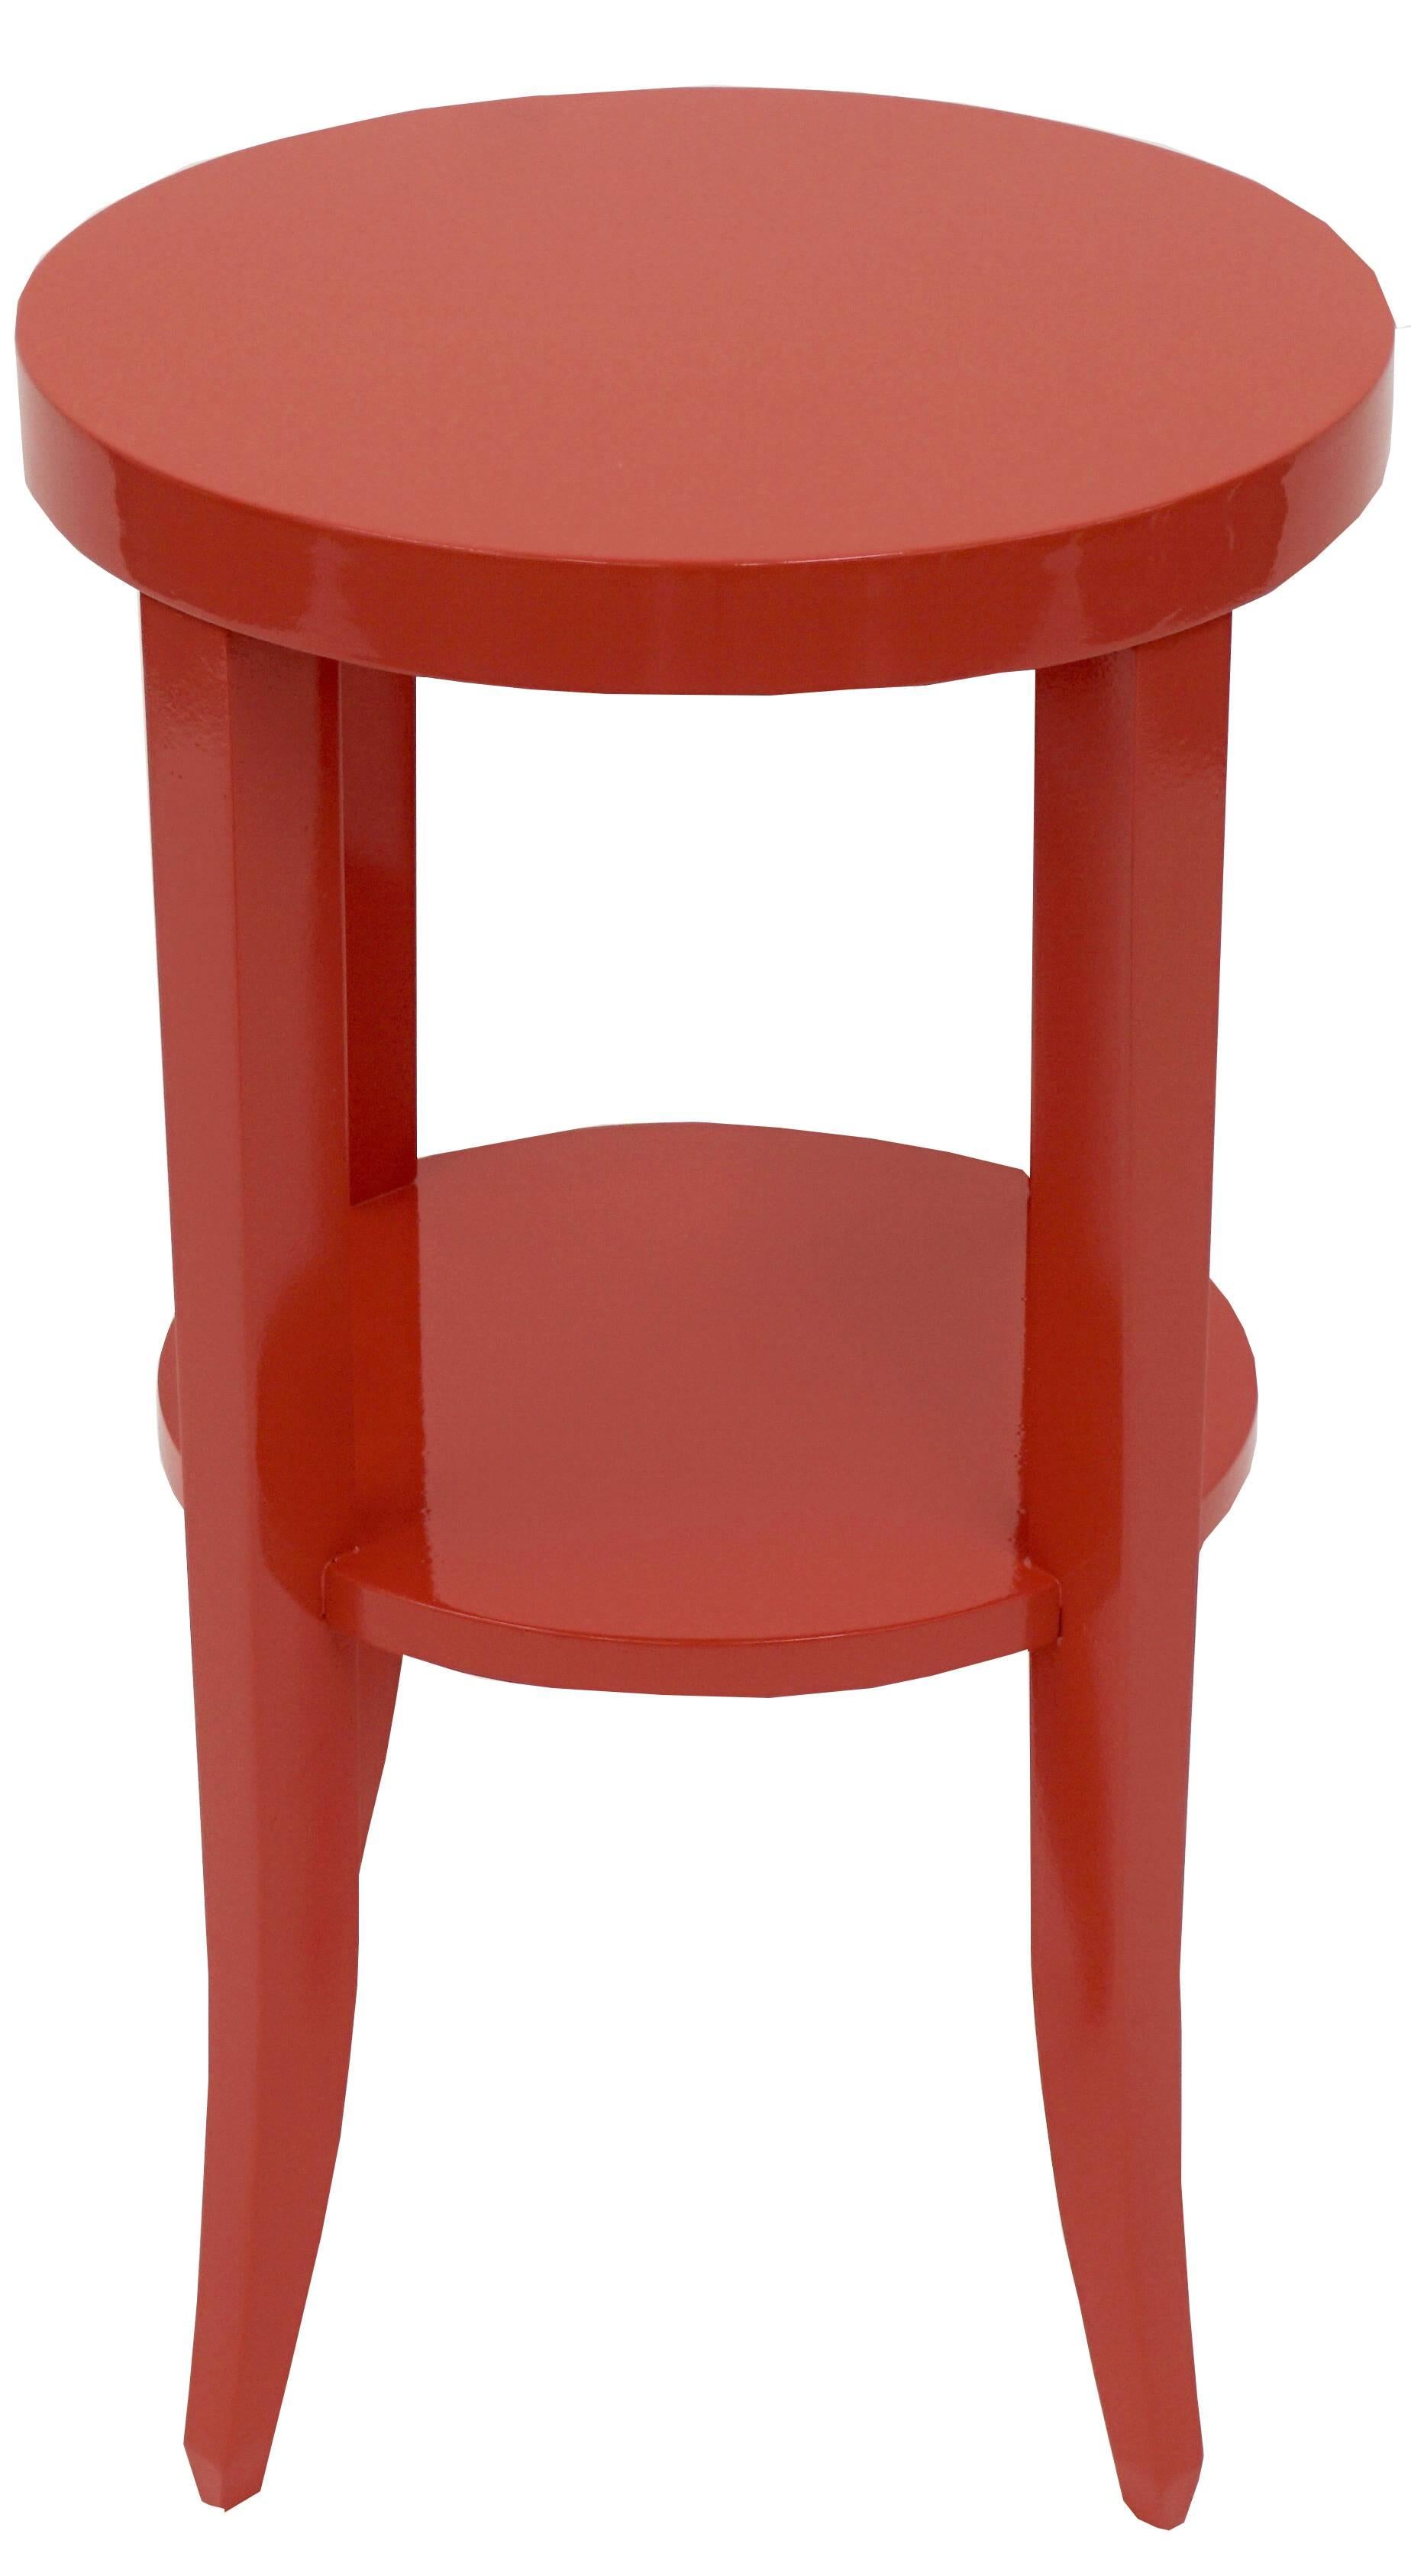 Place this newly lacquered table anywhere to add a pop to your room.